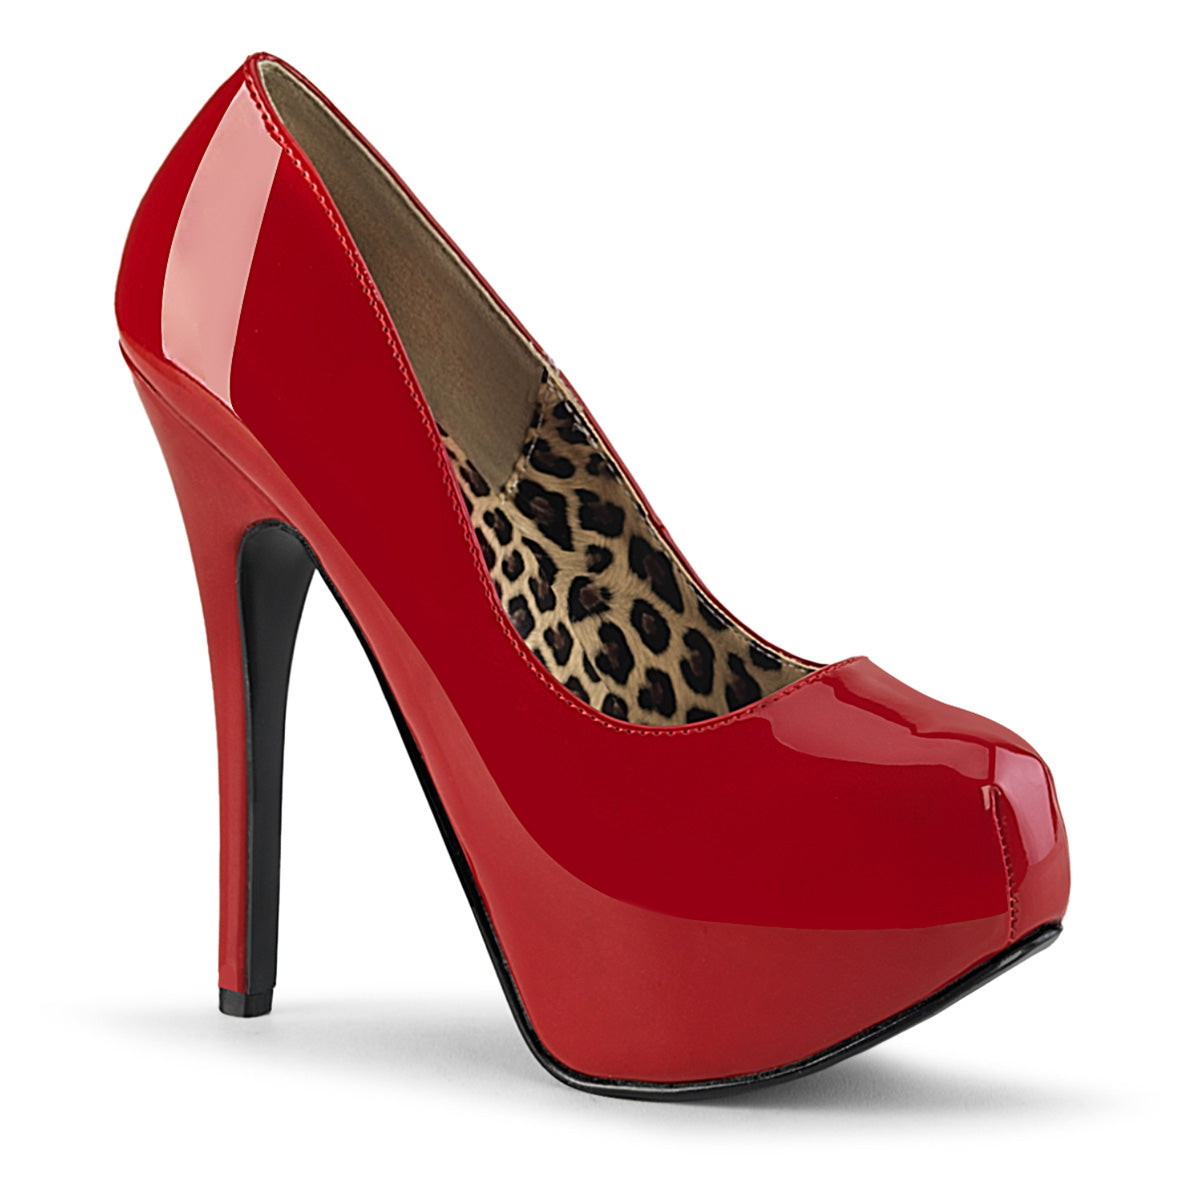 TEEZE-06 Red Patent